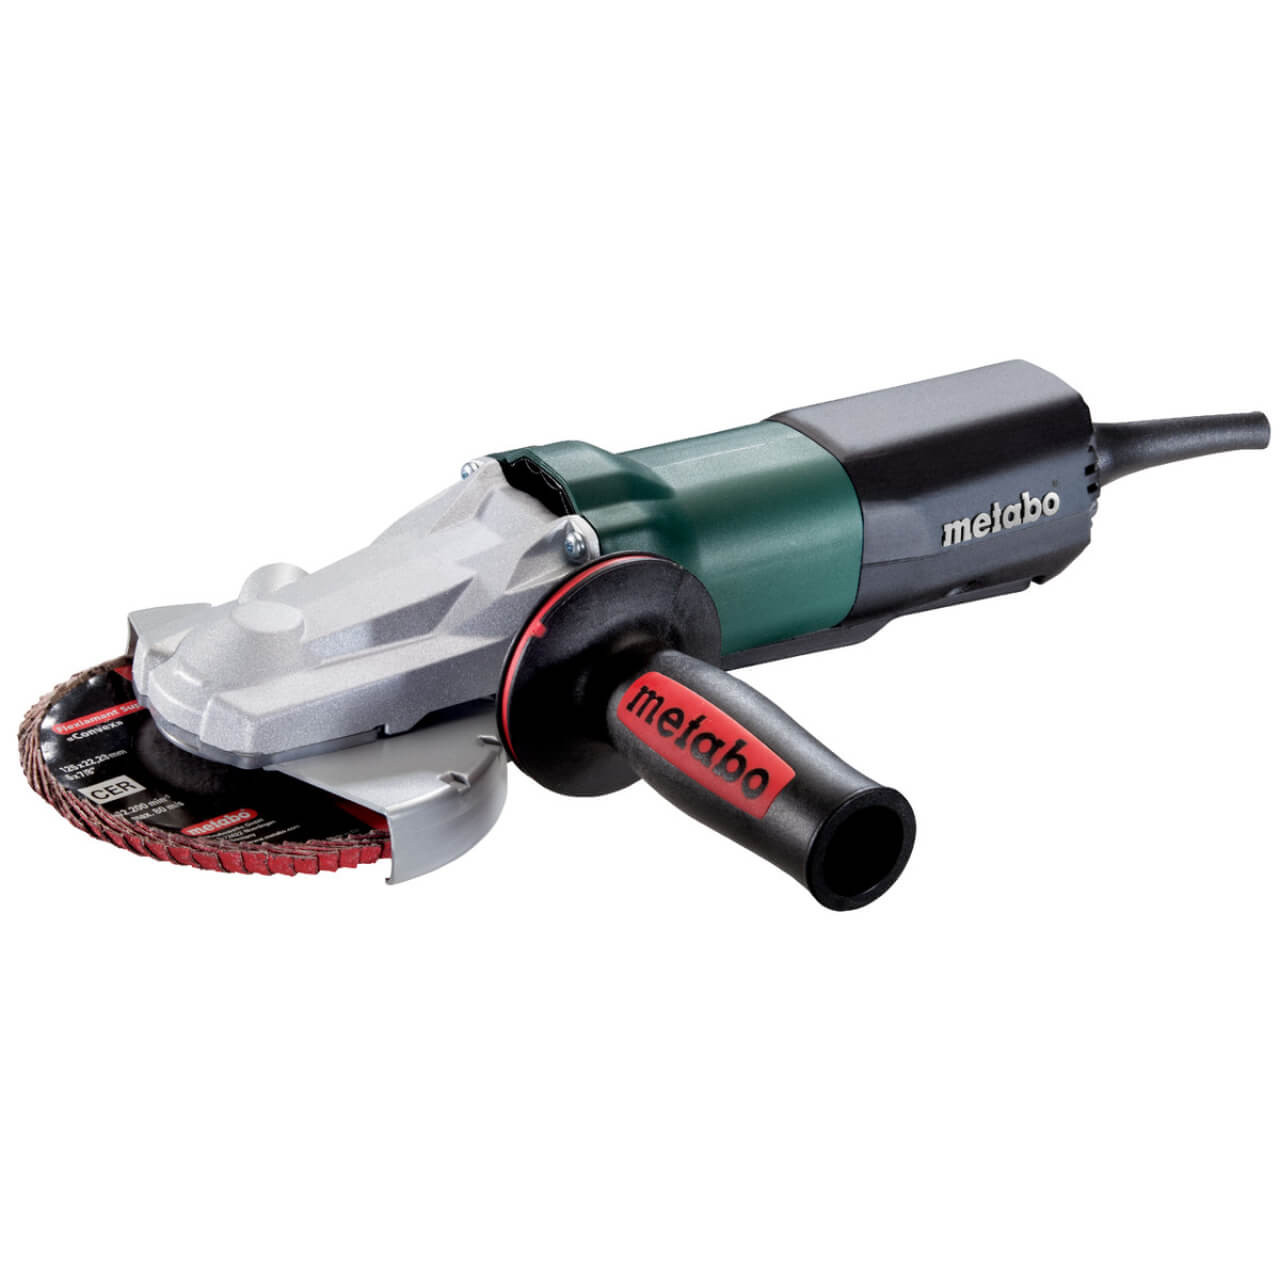 Metabo WEPF 9-125 QUICK Flat-head Angle Grinder 125mm 900W Deadman Switch